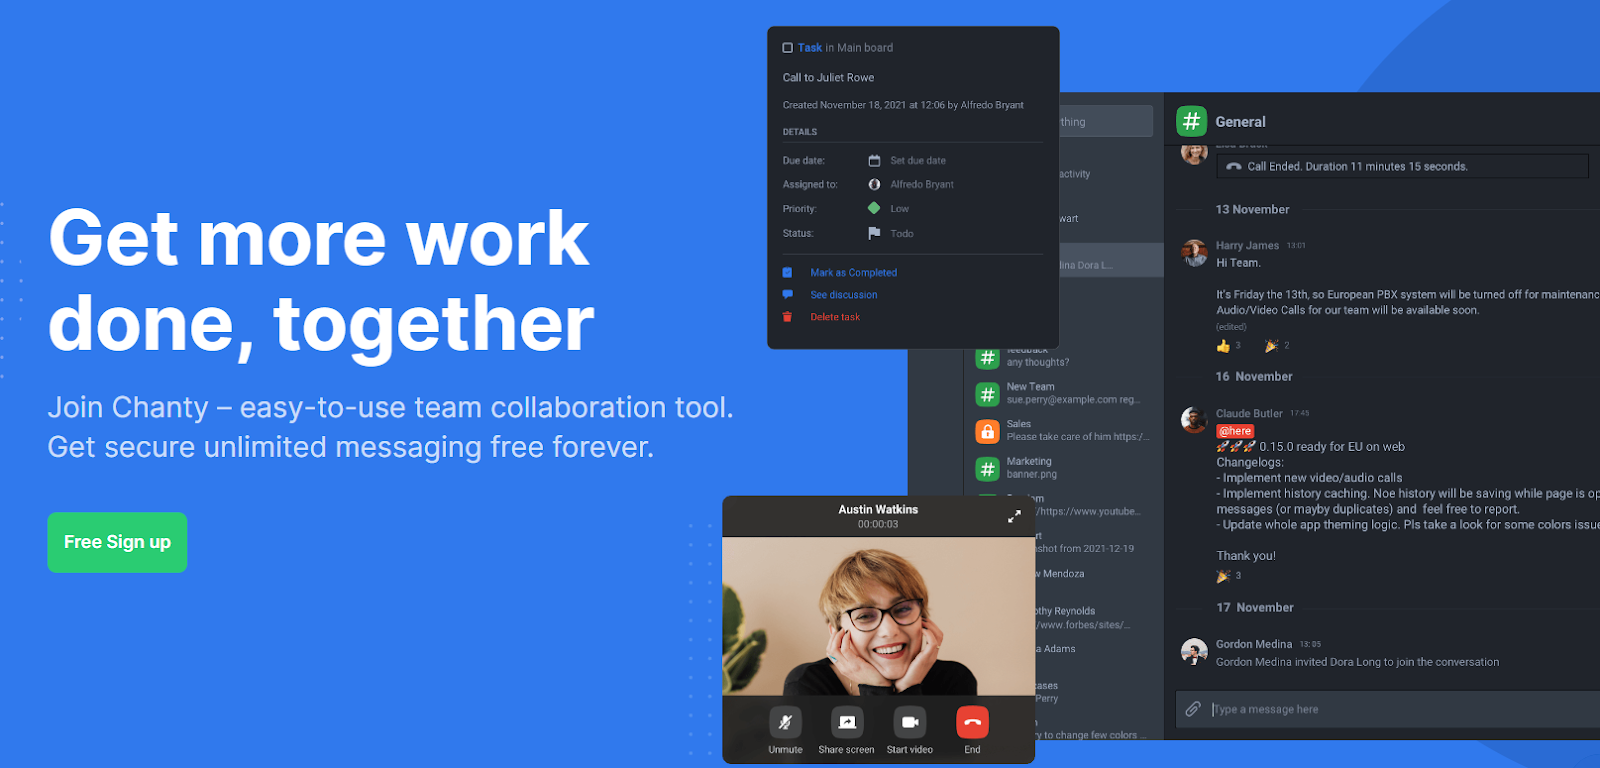 Manage Your Team's Projects From Anywhere